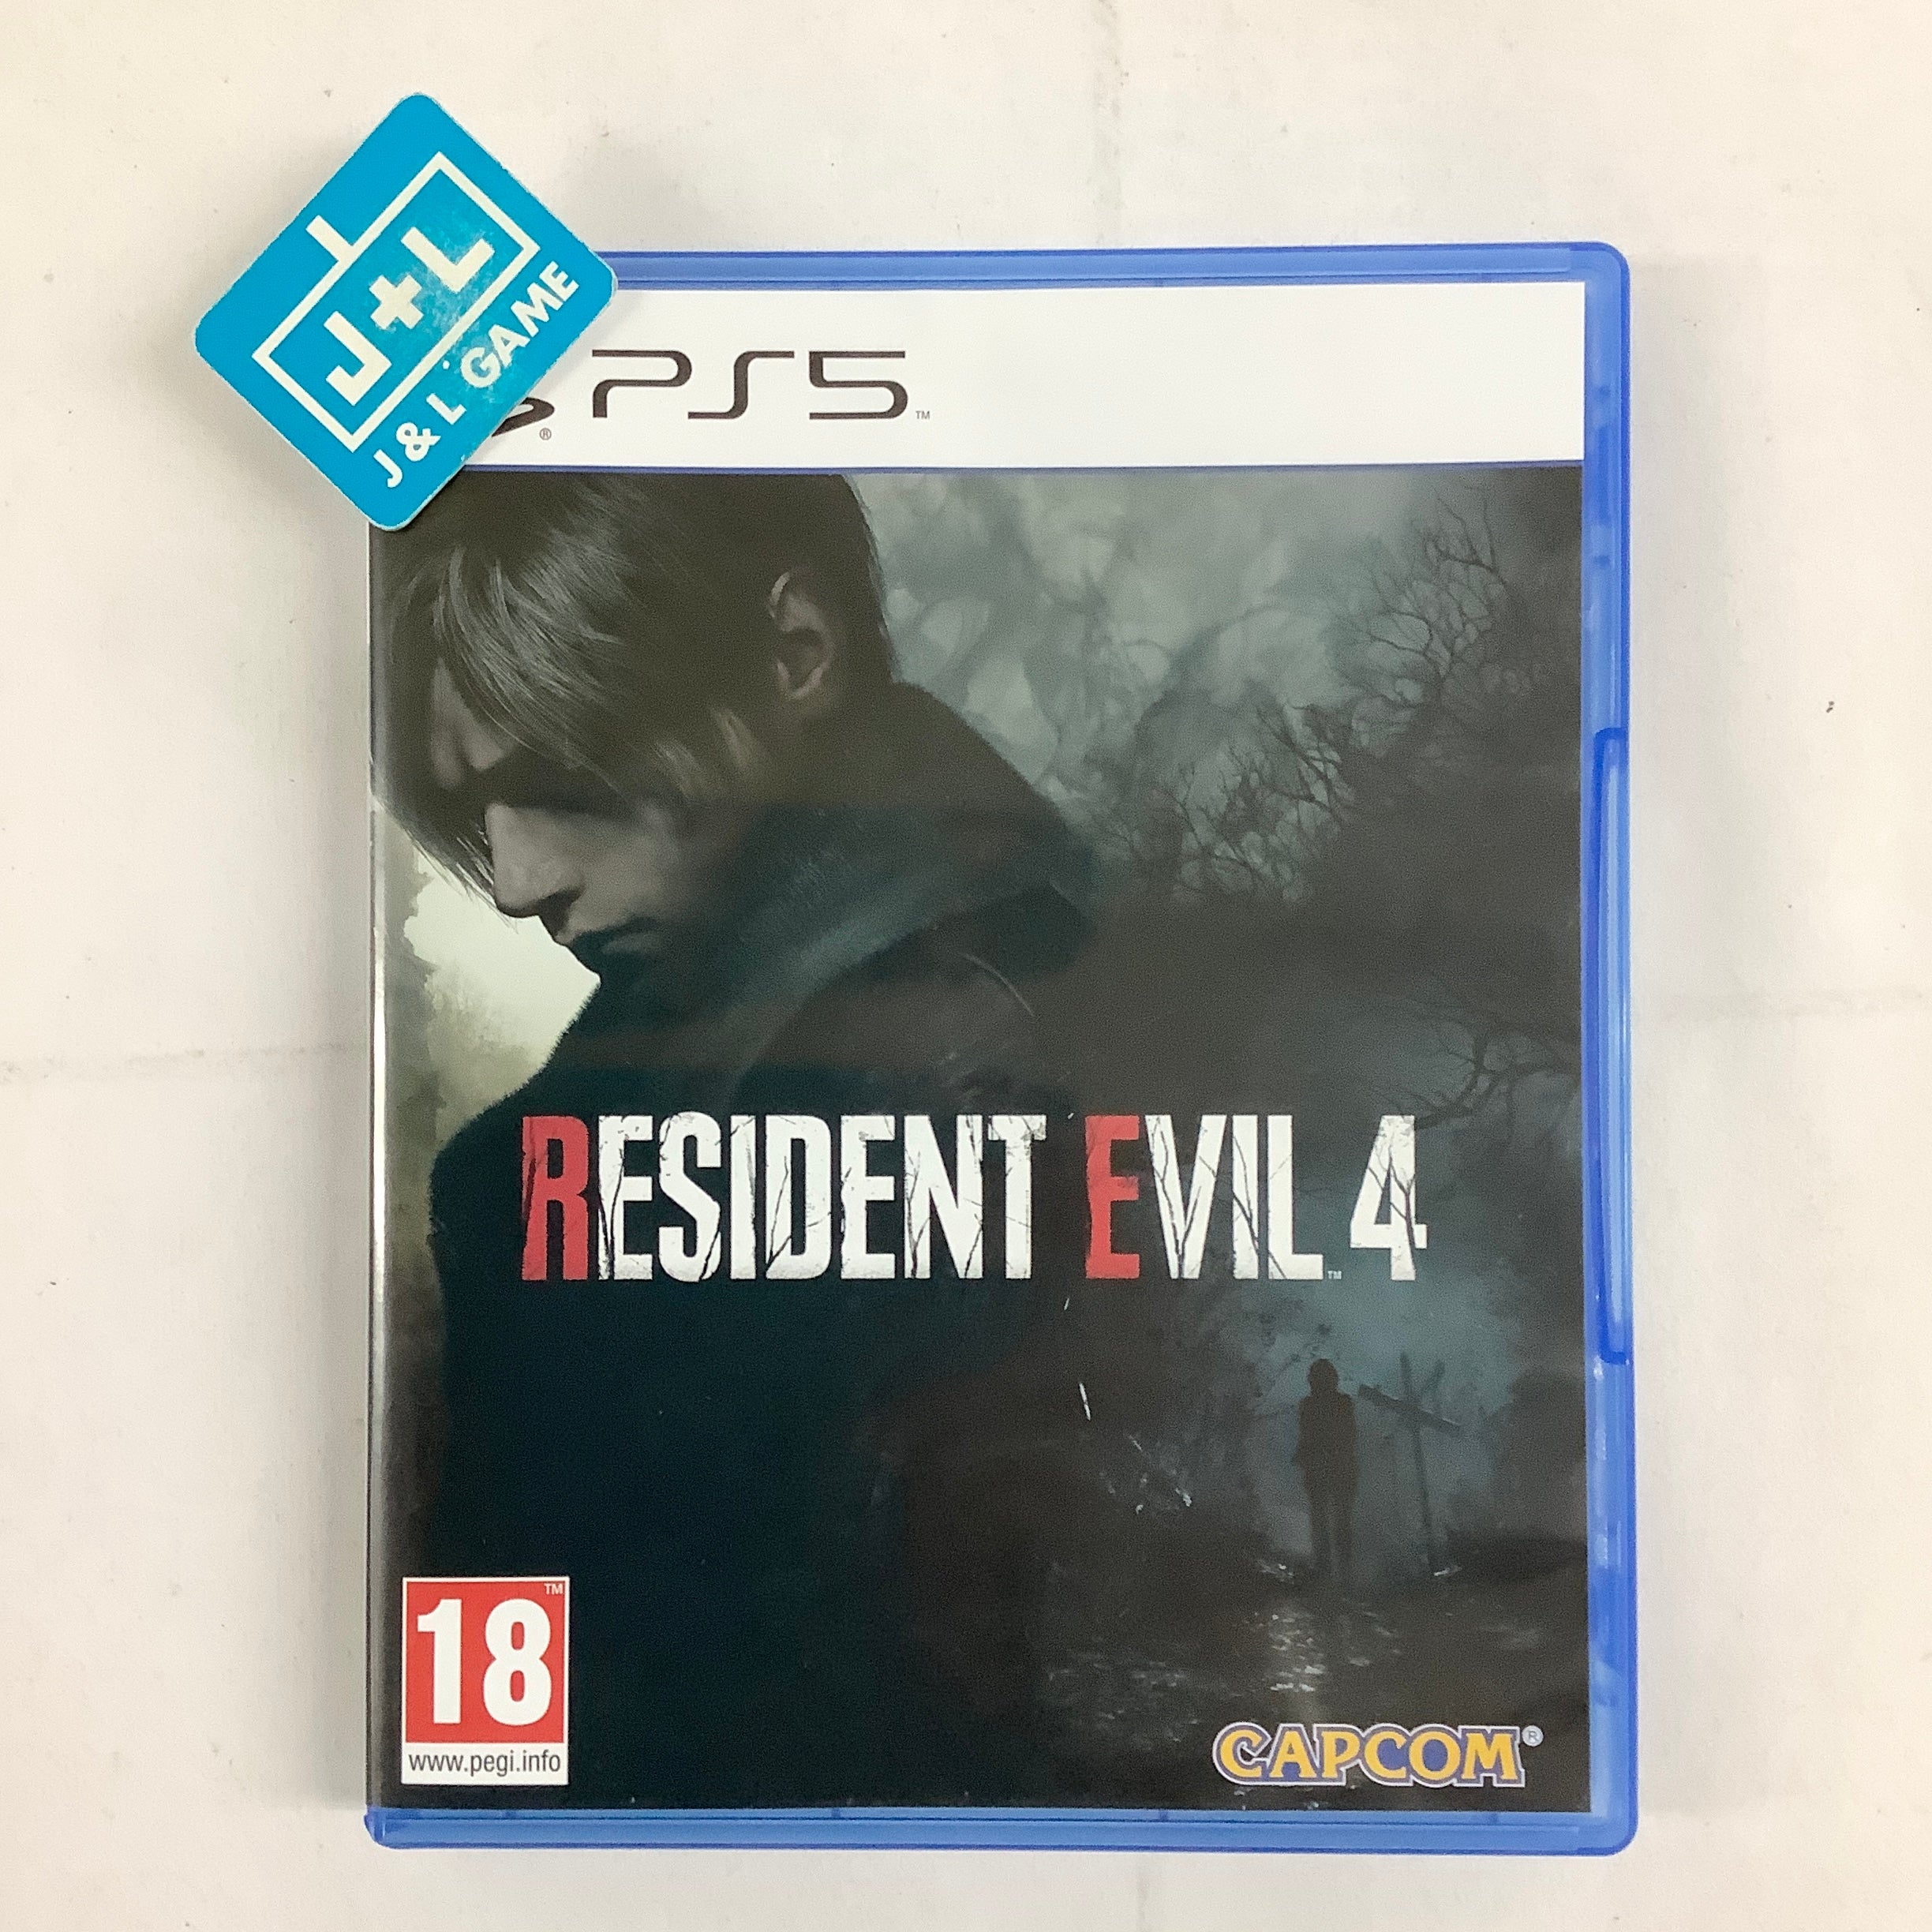 Resident Evil 4 - (PS5) PlayStation 5 [Pre-Owned] (European Import) Video Games Capcom   